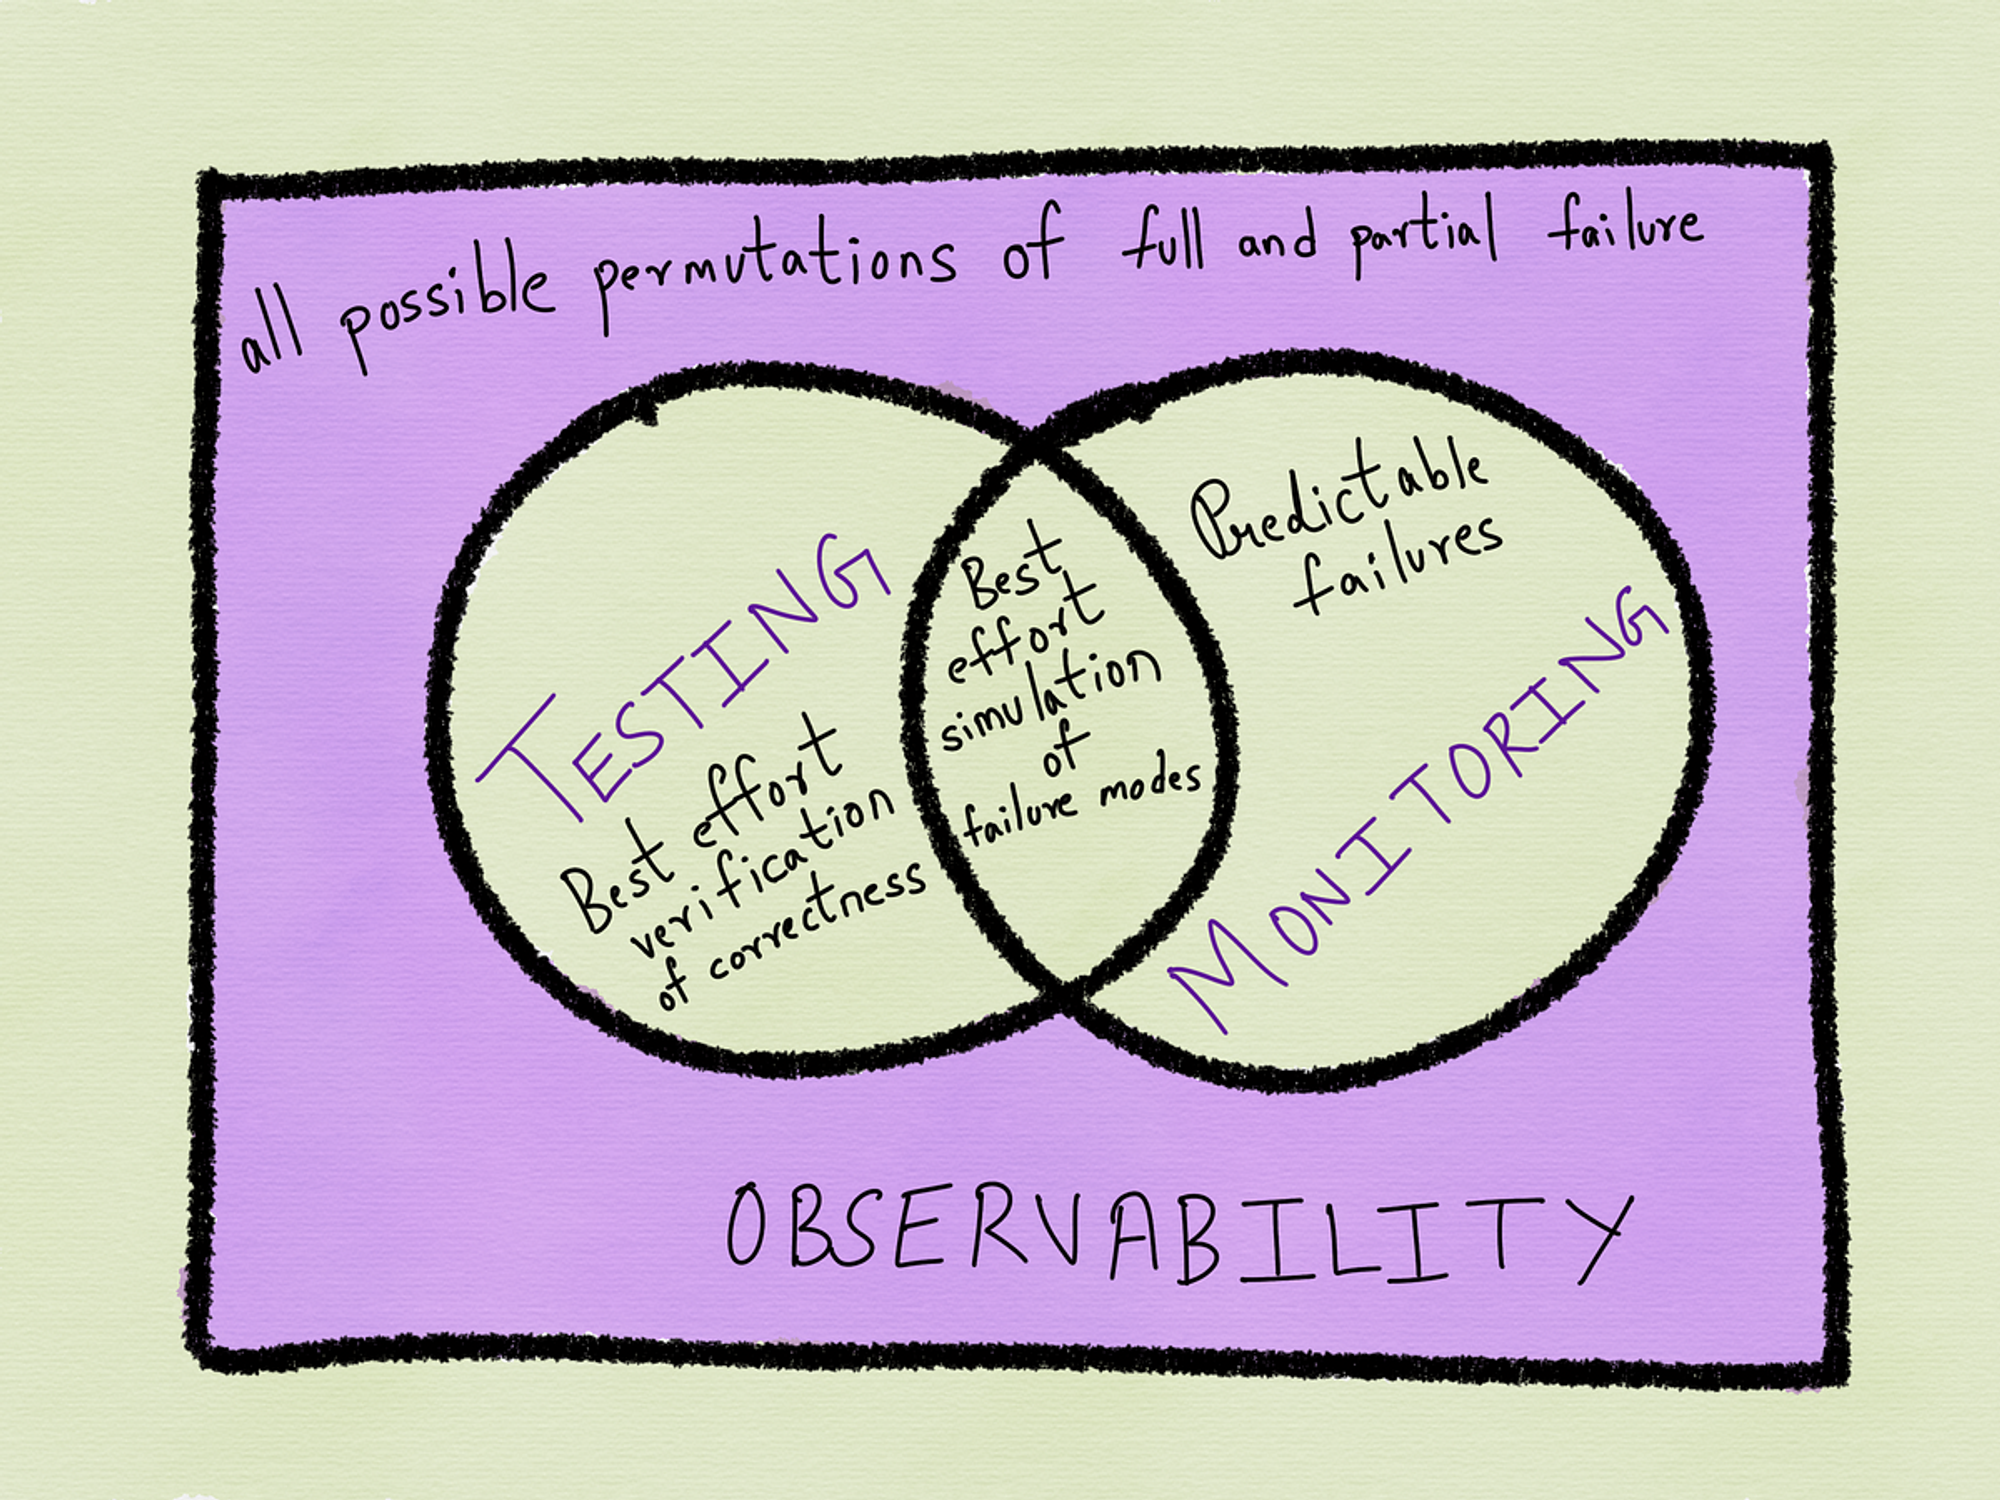 Monitoring and Observability